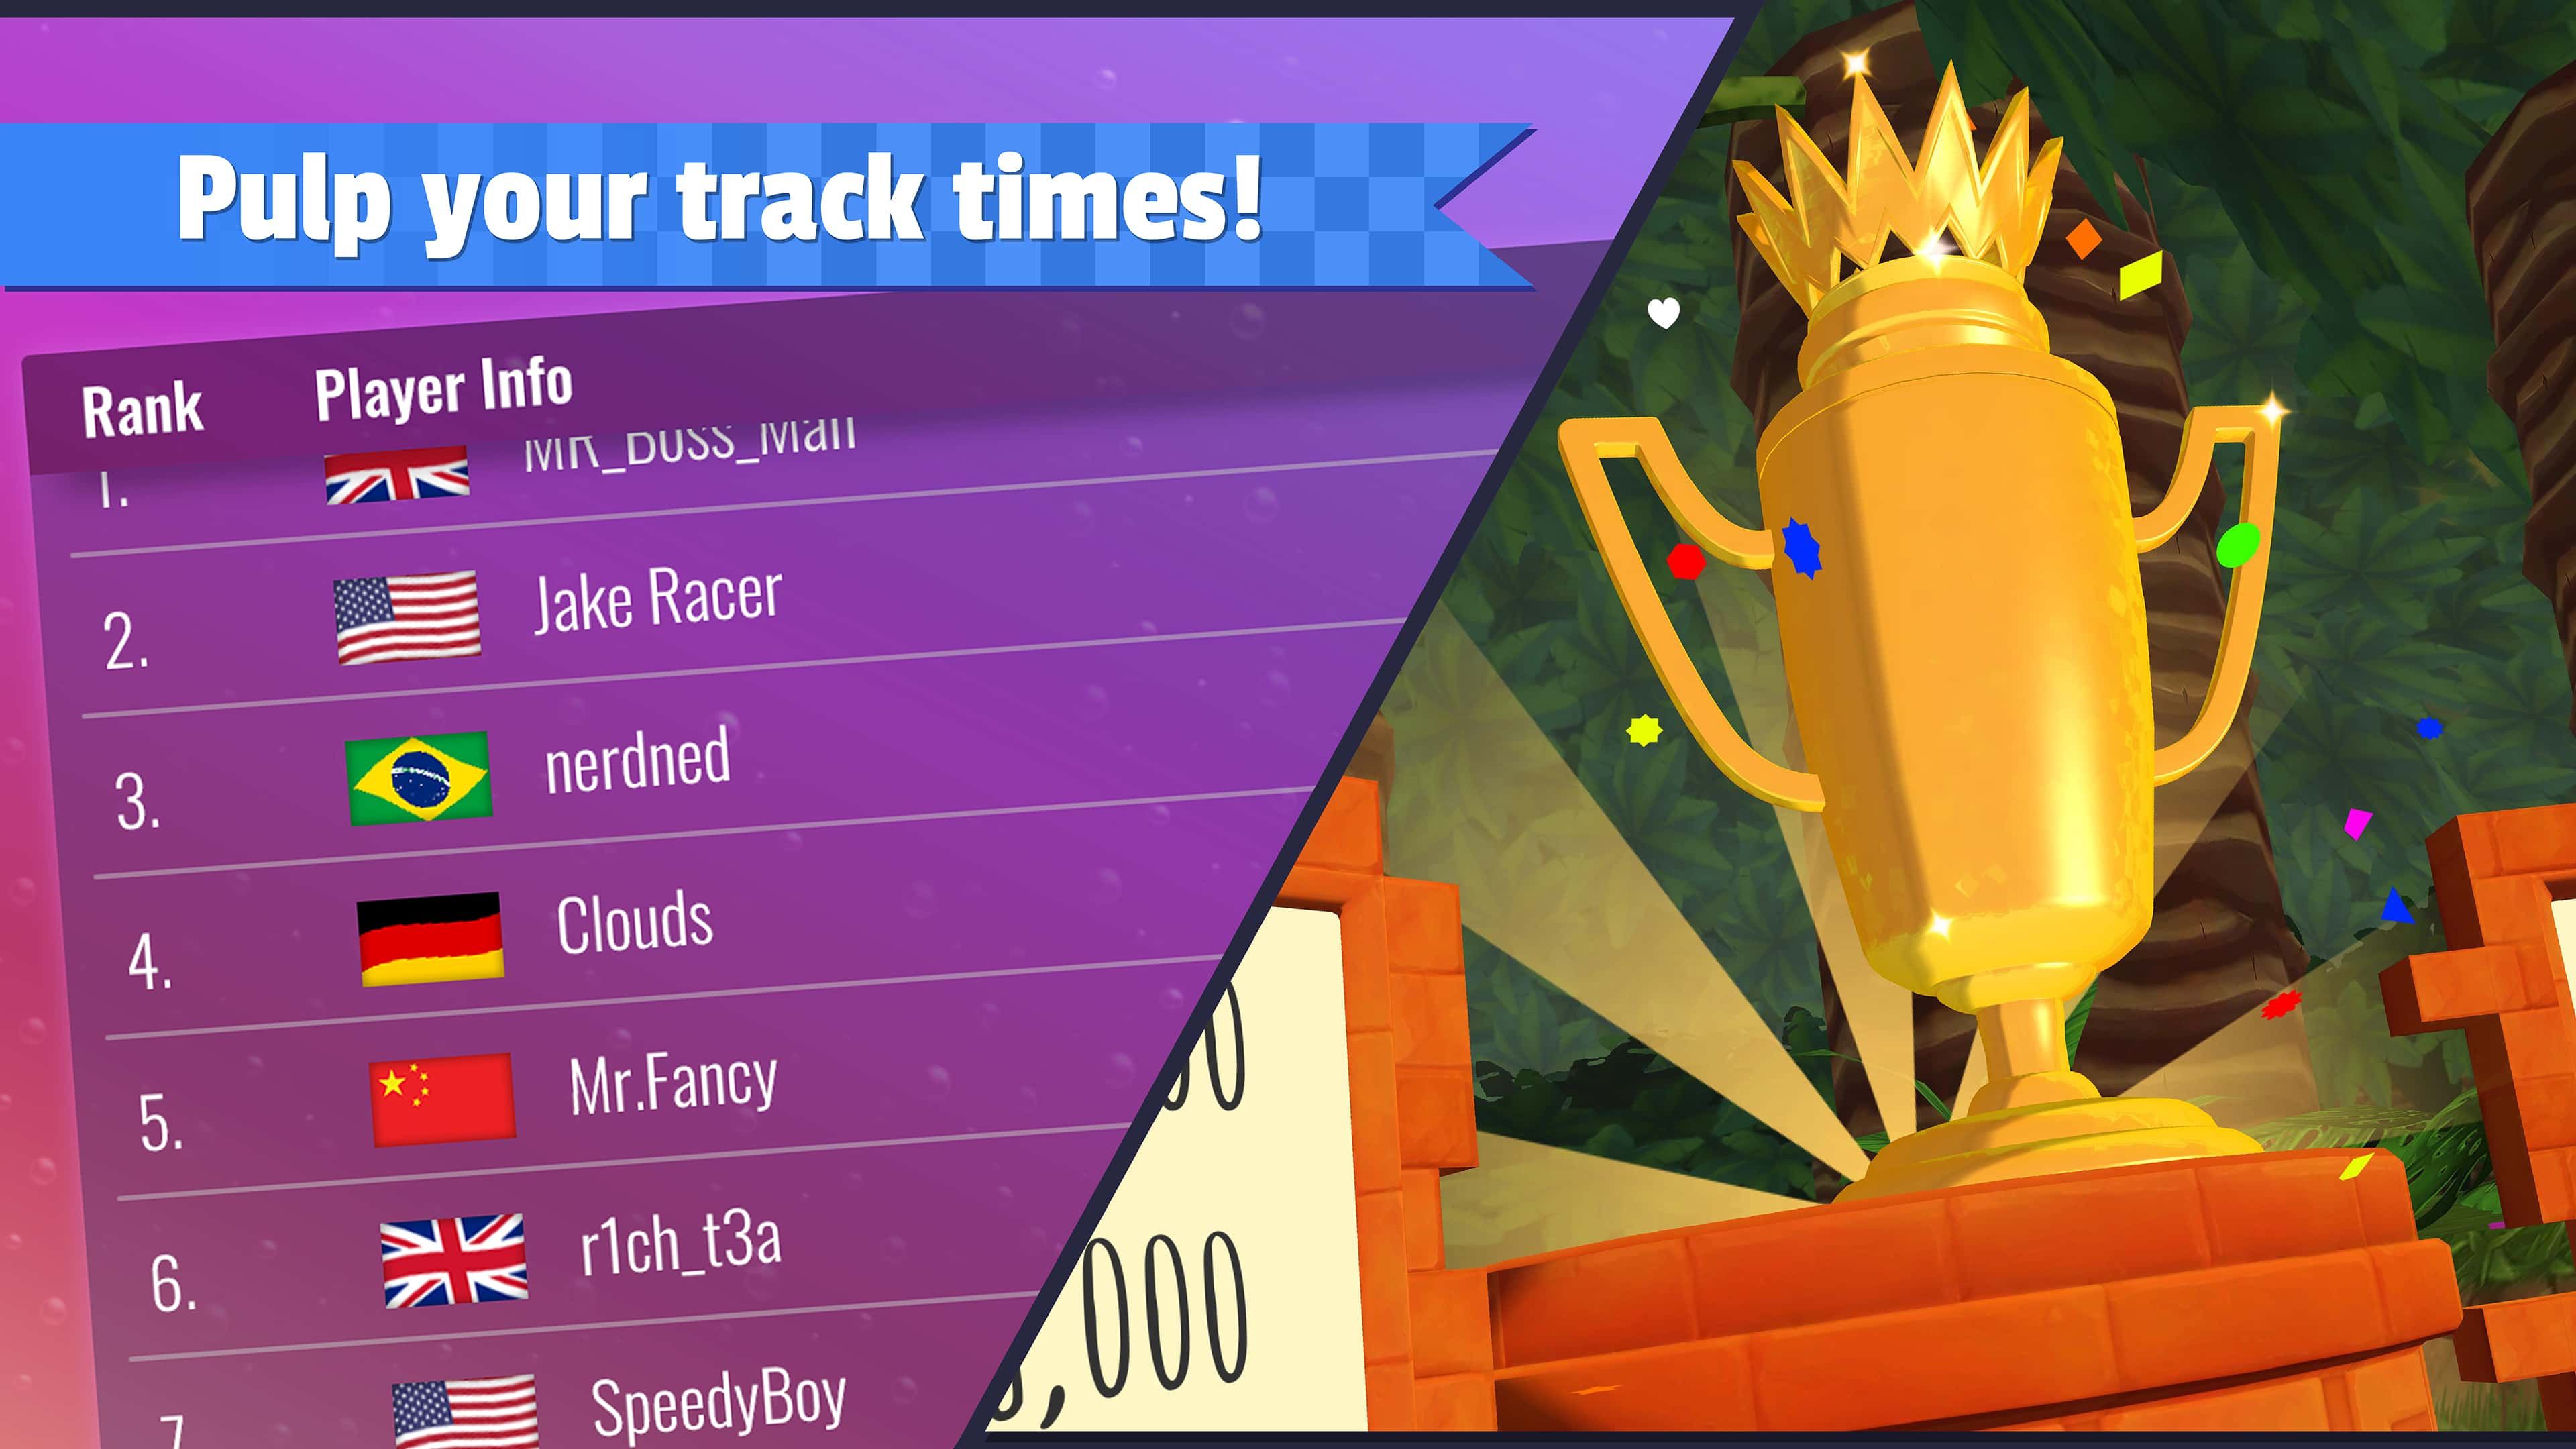 Short, quick-fire track challenges